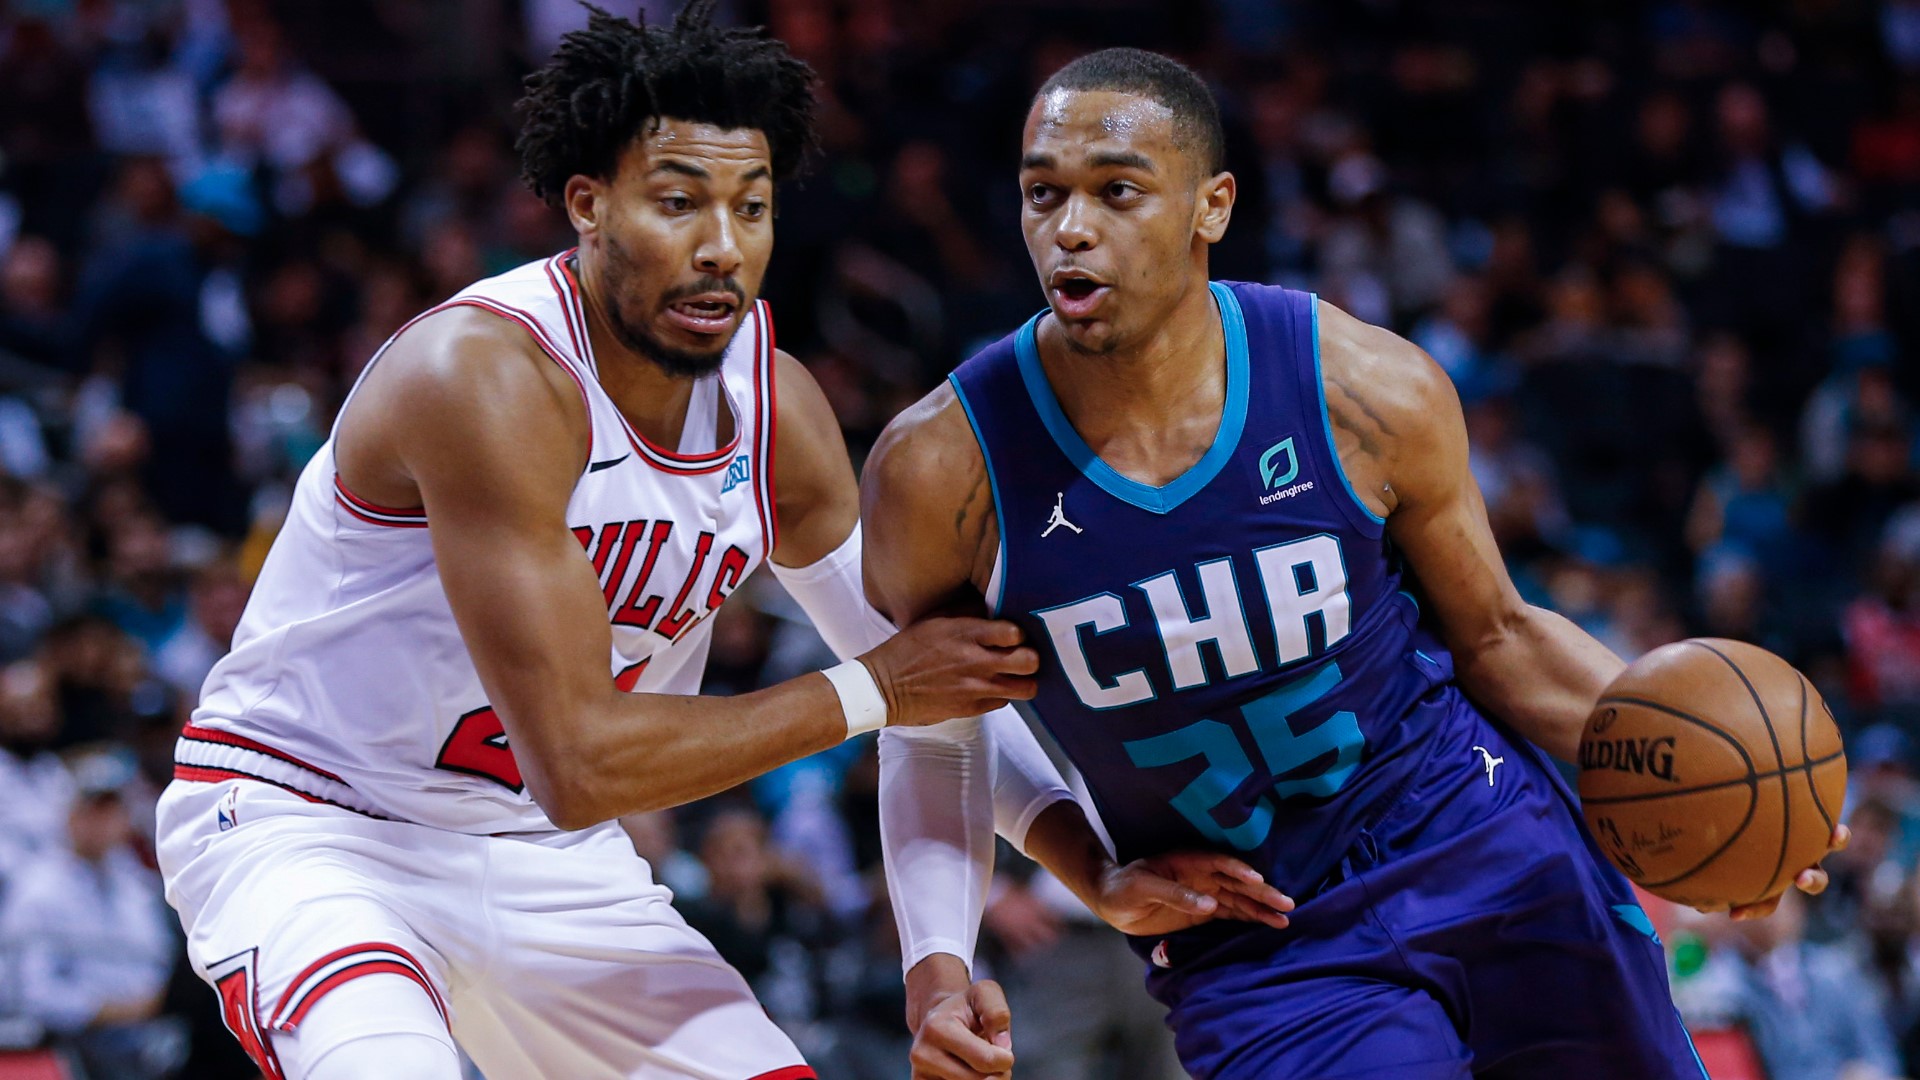 Rookie forward PJ Washington was sensational, scoring 27 points in his Hornets debut, setting a new team record in the process.